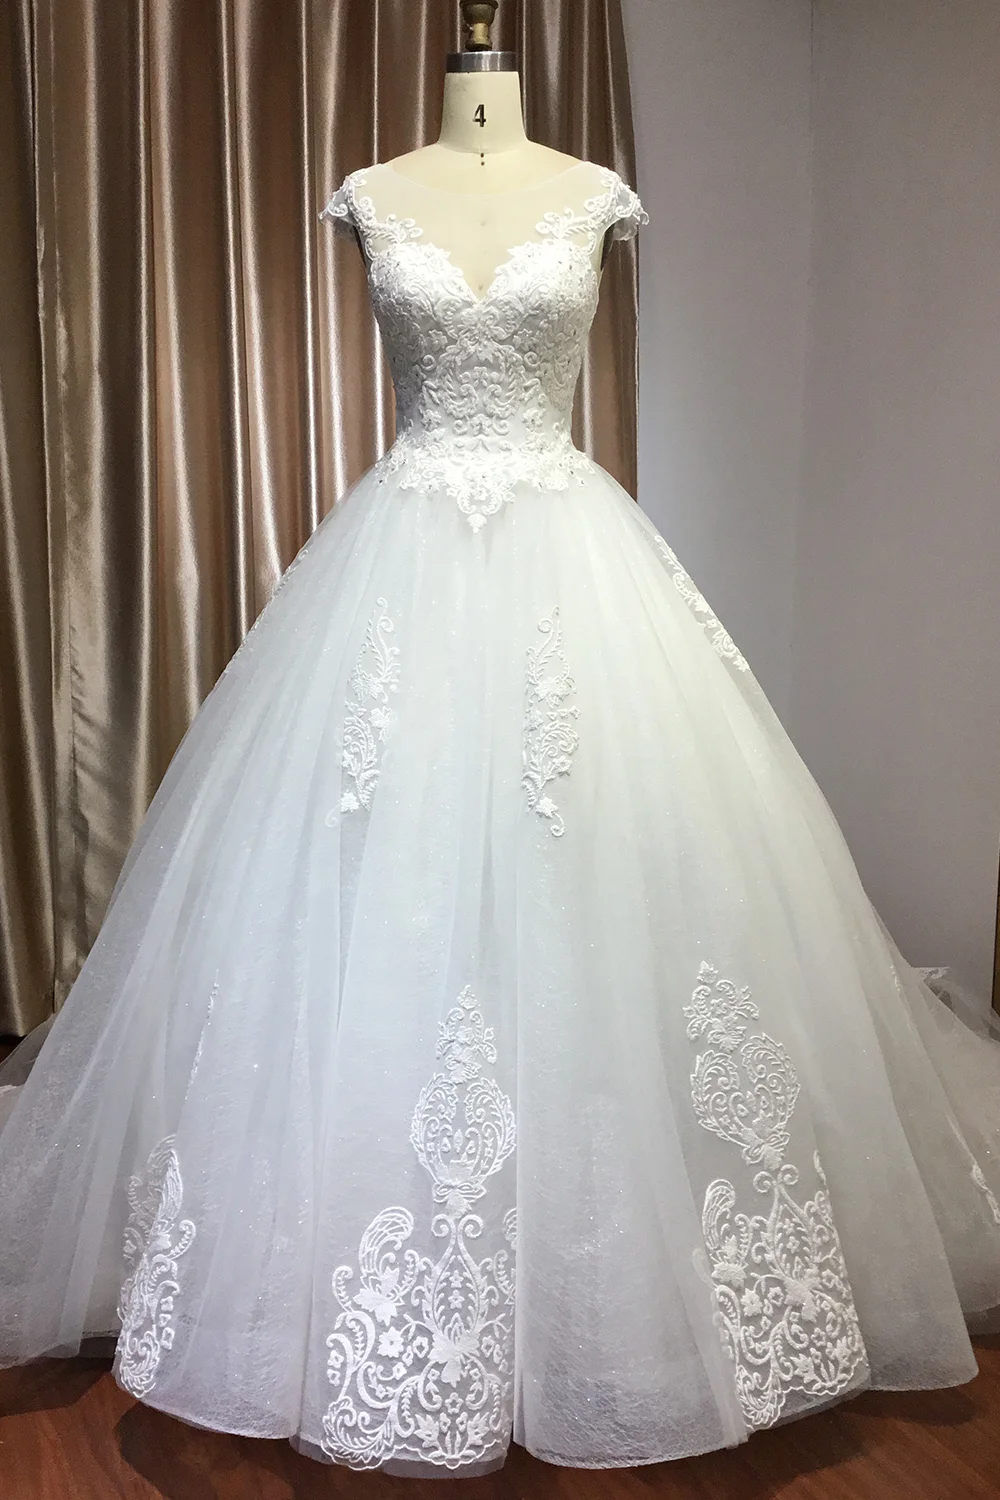 Elegant Cap Sleeve Sheer Tulle Ball Gown Wedding Dress With Lace V-neck